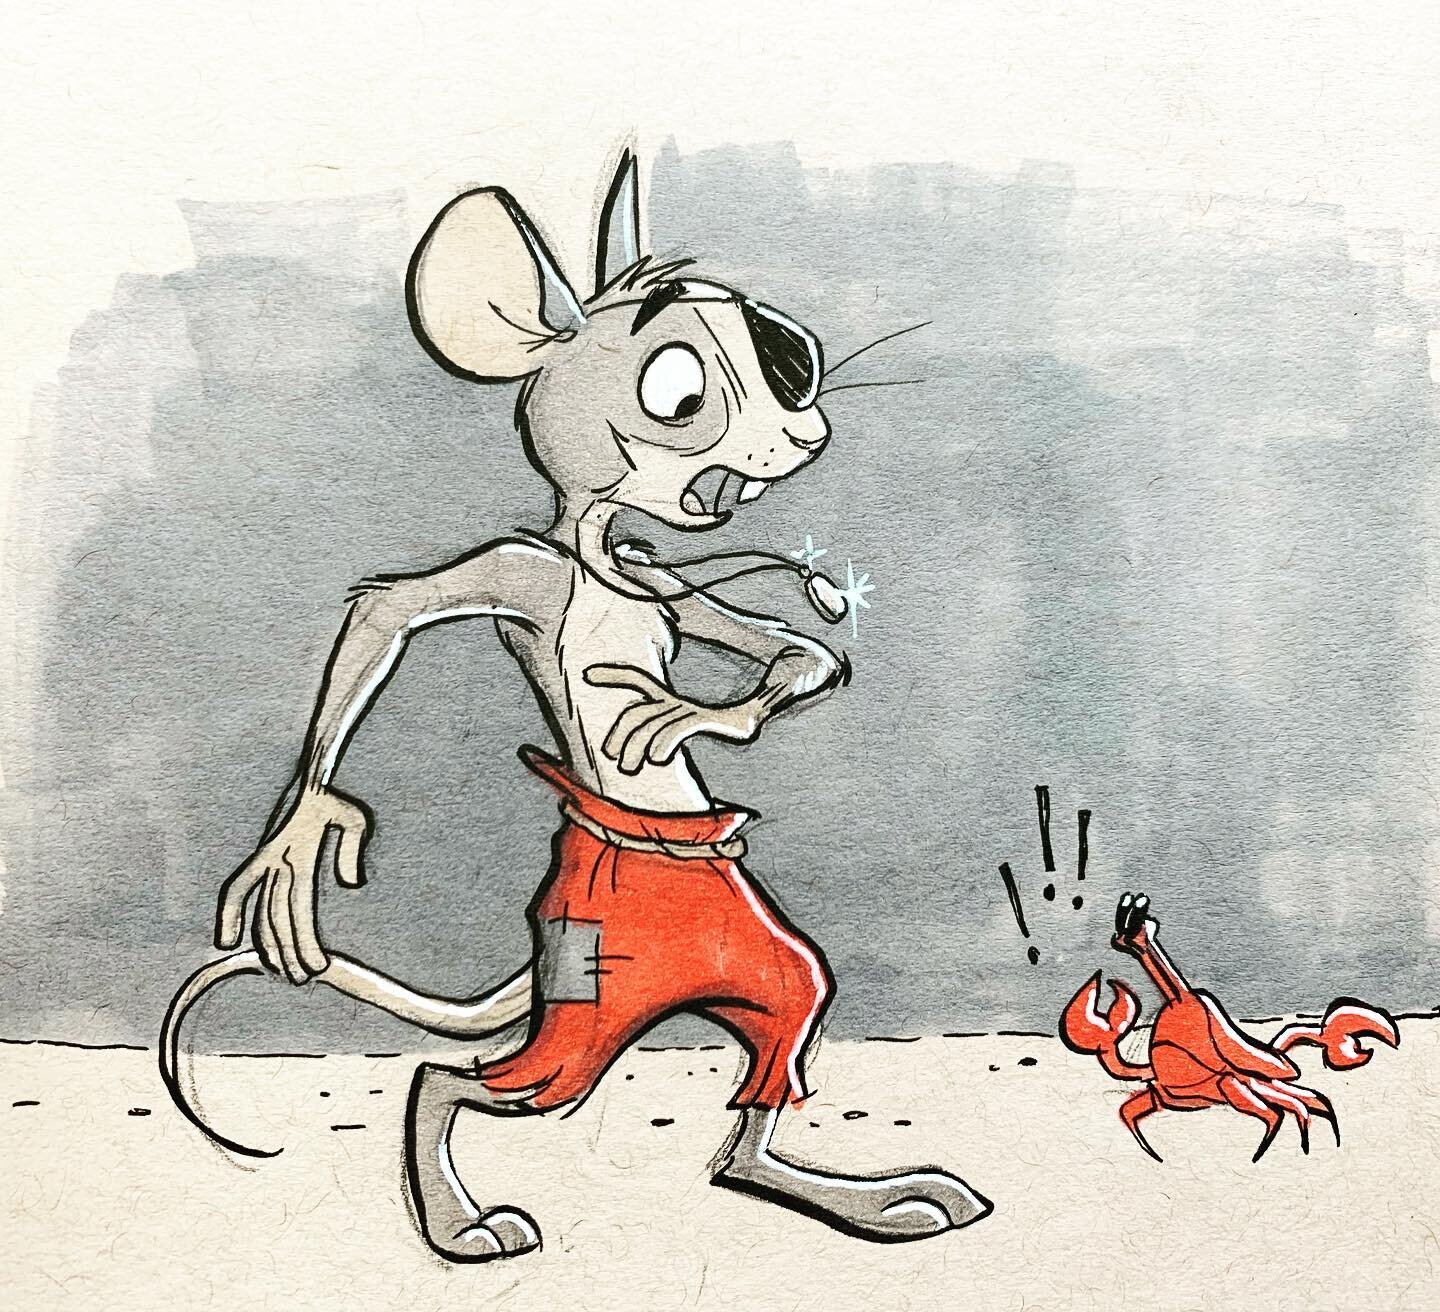 I did this fun pirate mouse drawing last night before bed!
.
.
.
#pirate #mouse #characterdesign #cartoonart #cartoon #drawing #sketchbook #art #crab